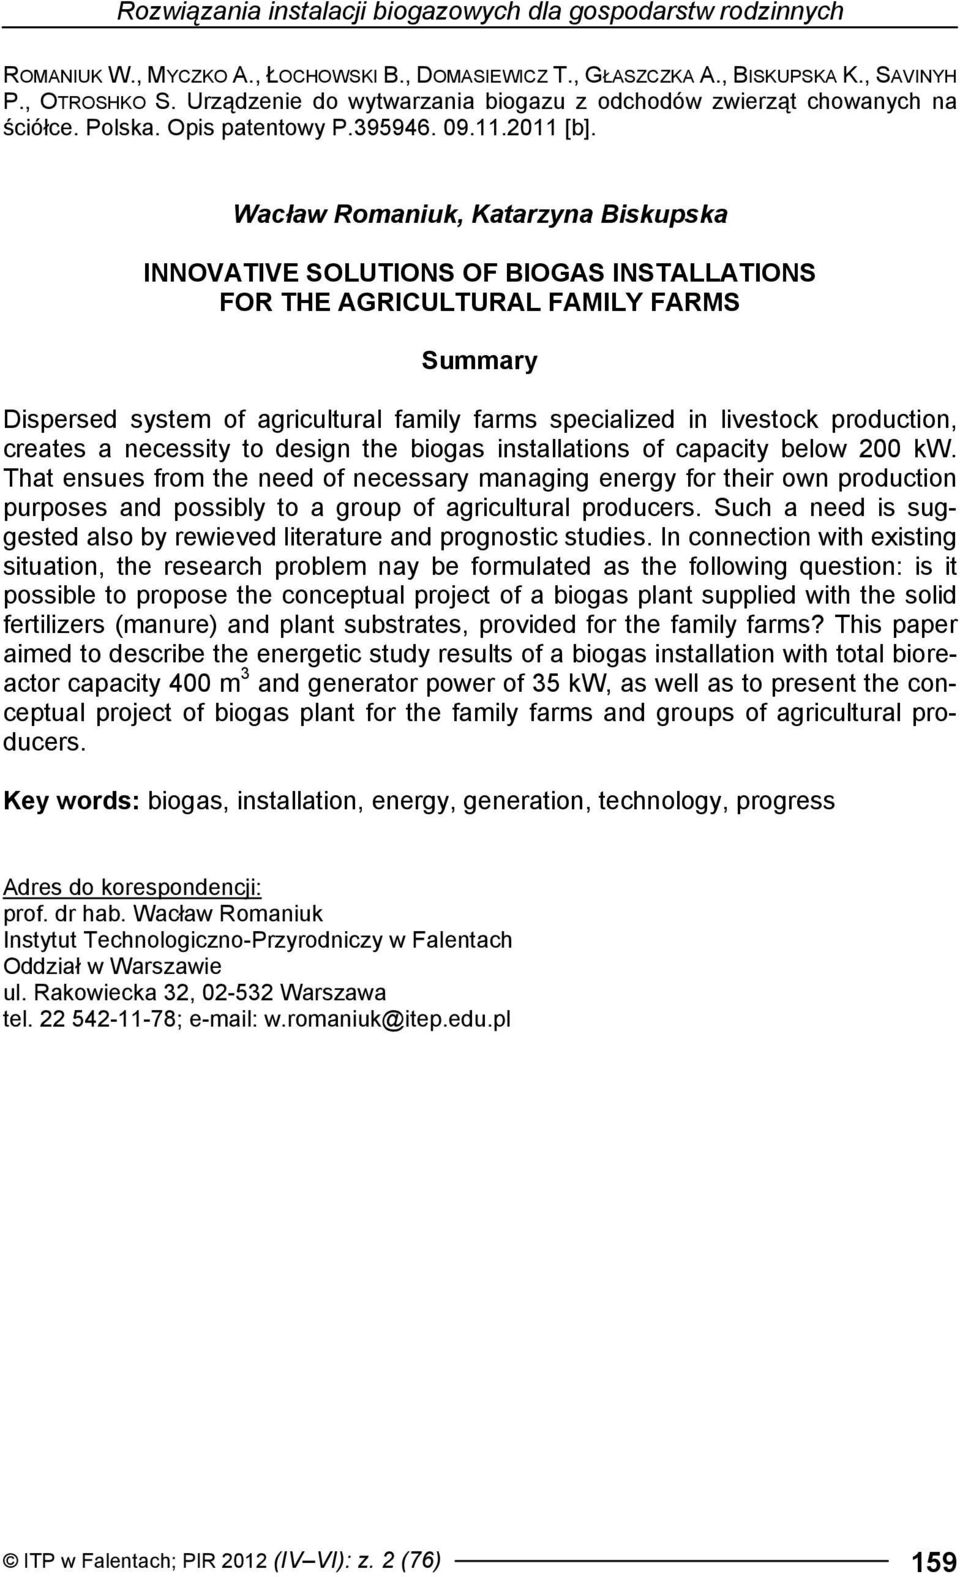 Wacław Romaniuk, Katarzyna Biskupska INNOVATIVE SOLUTIONS OF BIOGAS INSTALLATIONS FOR THE AGRICULTURAL FAMILY FARMS Summary Dispersed system of agricultural family farms specialized in livestock